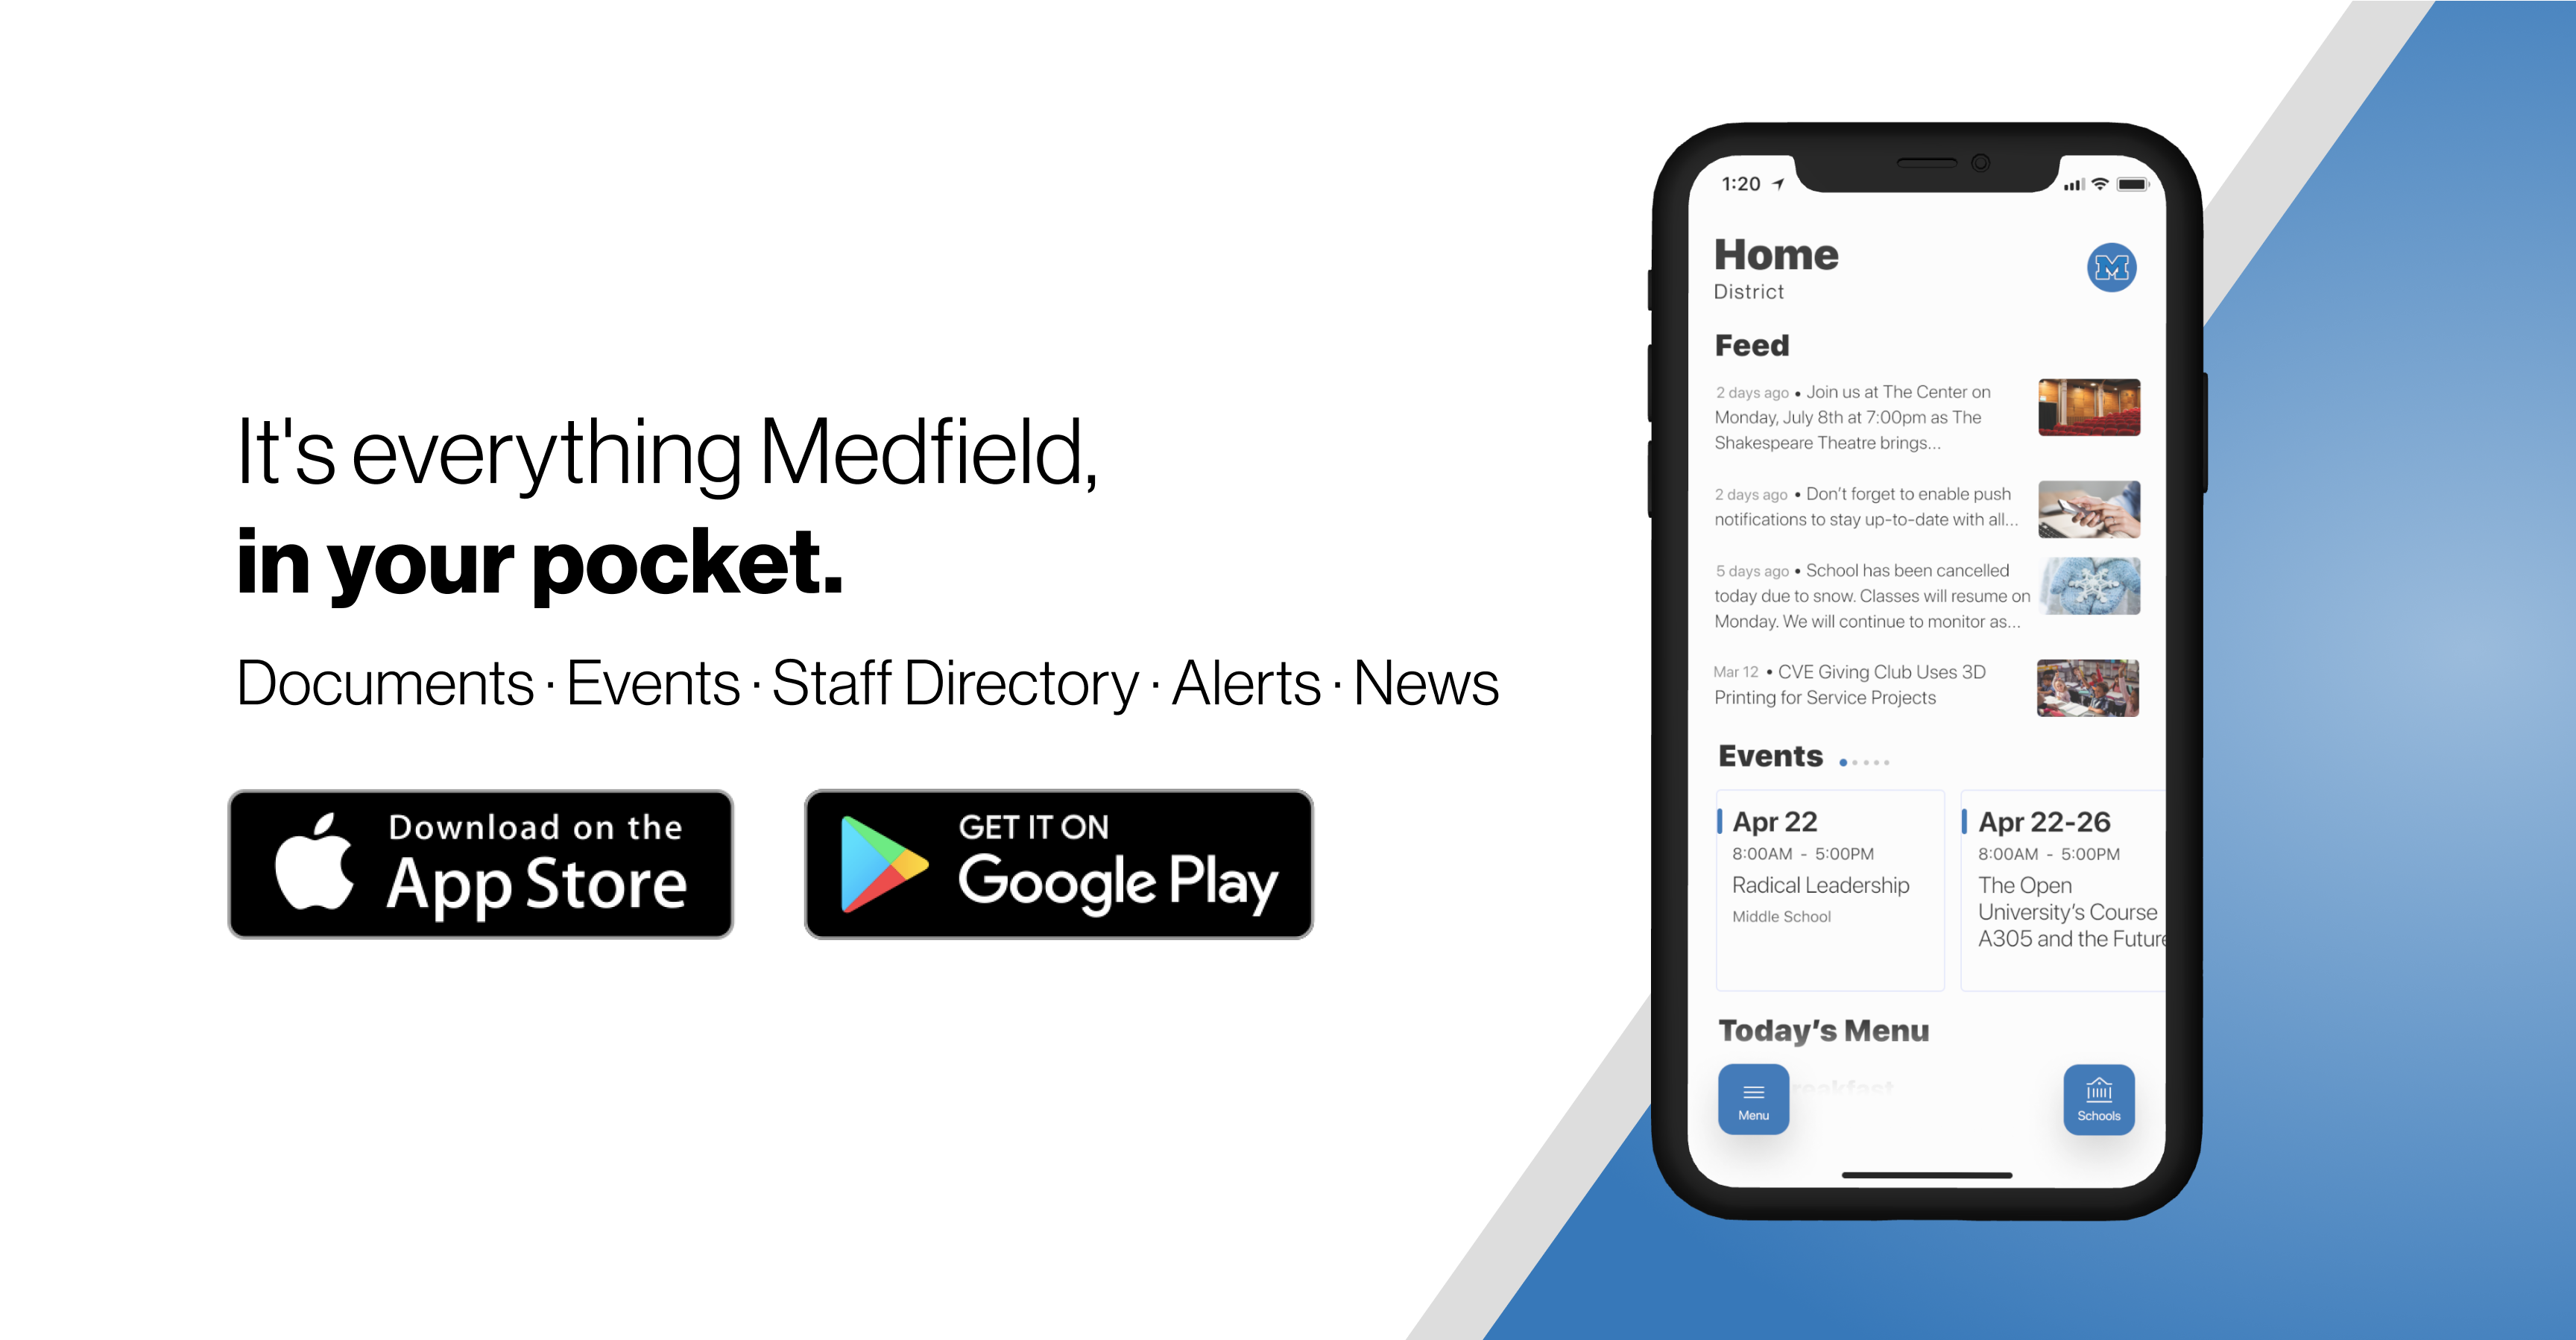 Promoting the Medfield Mobile App